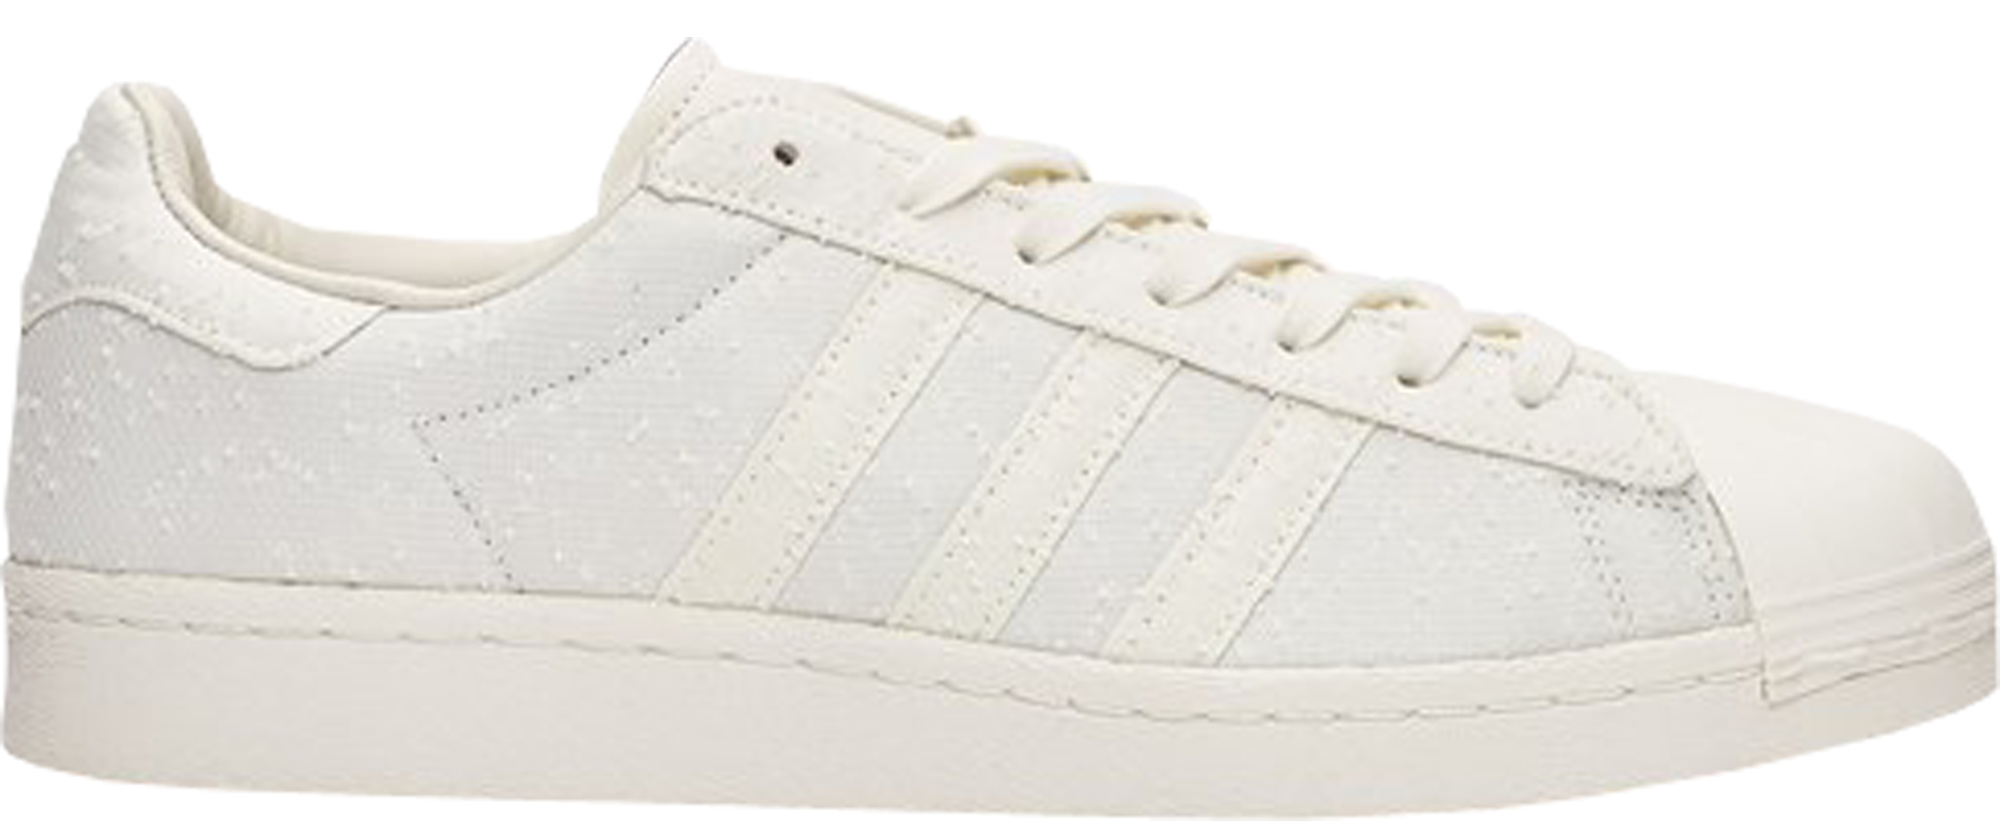 Sneakersnstuff x adidas Superstar Boost Shades Of White V2 ...